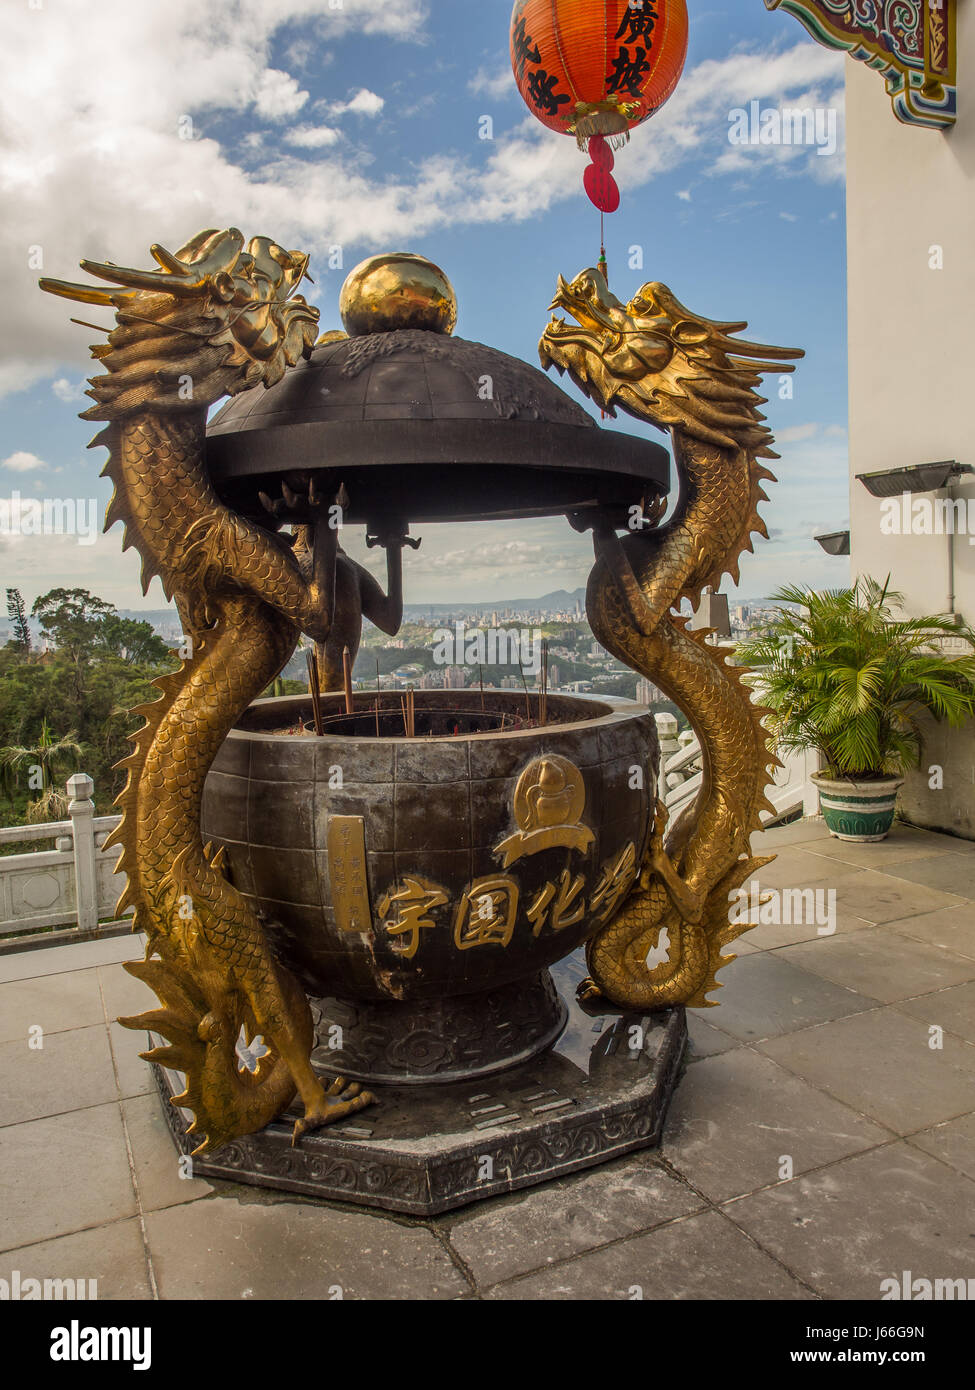 Maokong, Taiwan - October 19, 2016: A golden censer with two handles in the shape of dragons before the Chih Nan Temple on the hills of Maokong  in Ta Stock Photo